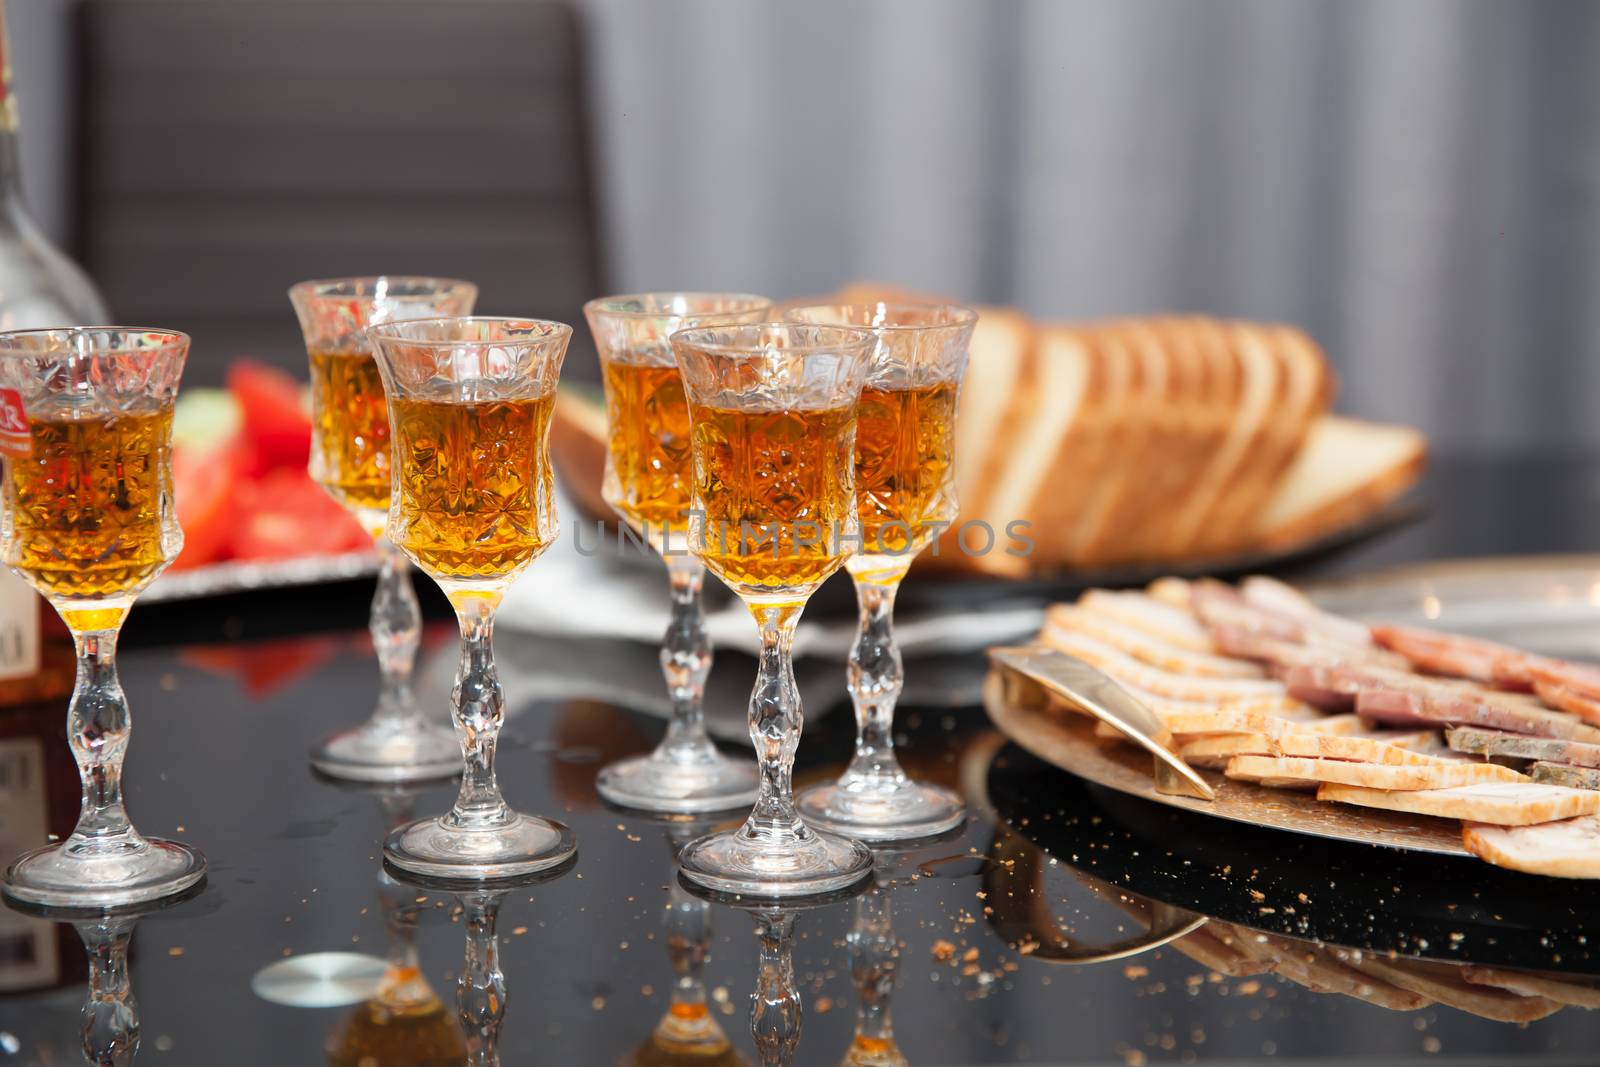 Glasses for cognac and whiskey, arrangen with food on party table